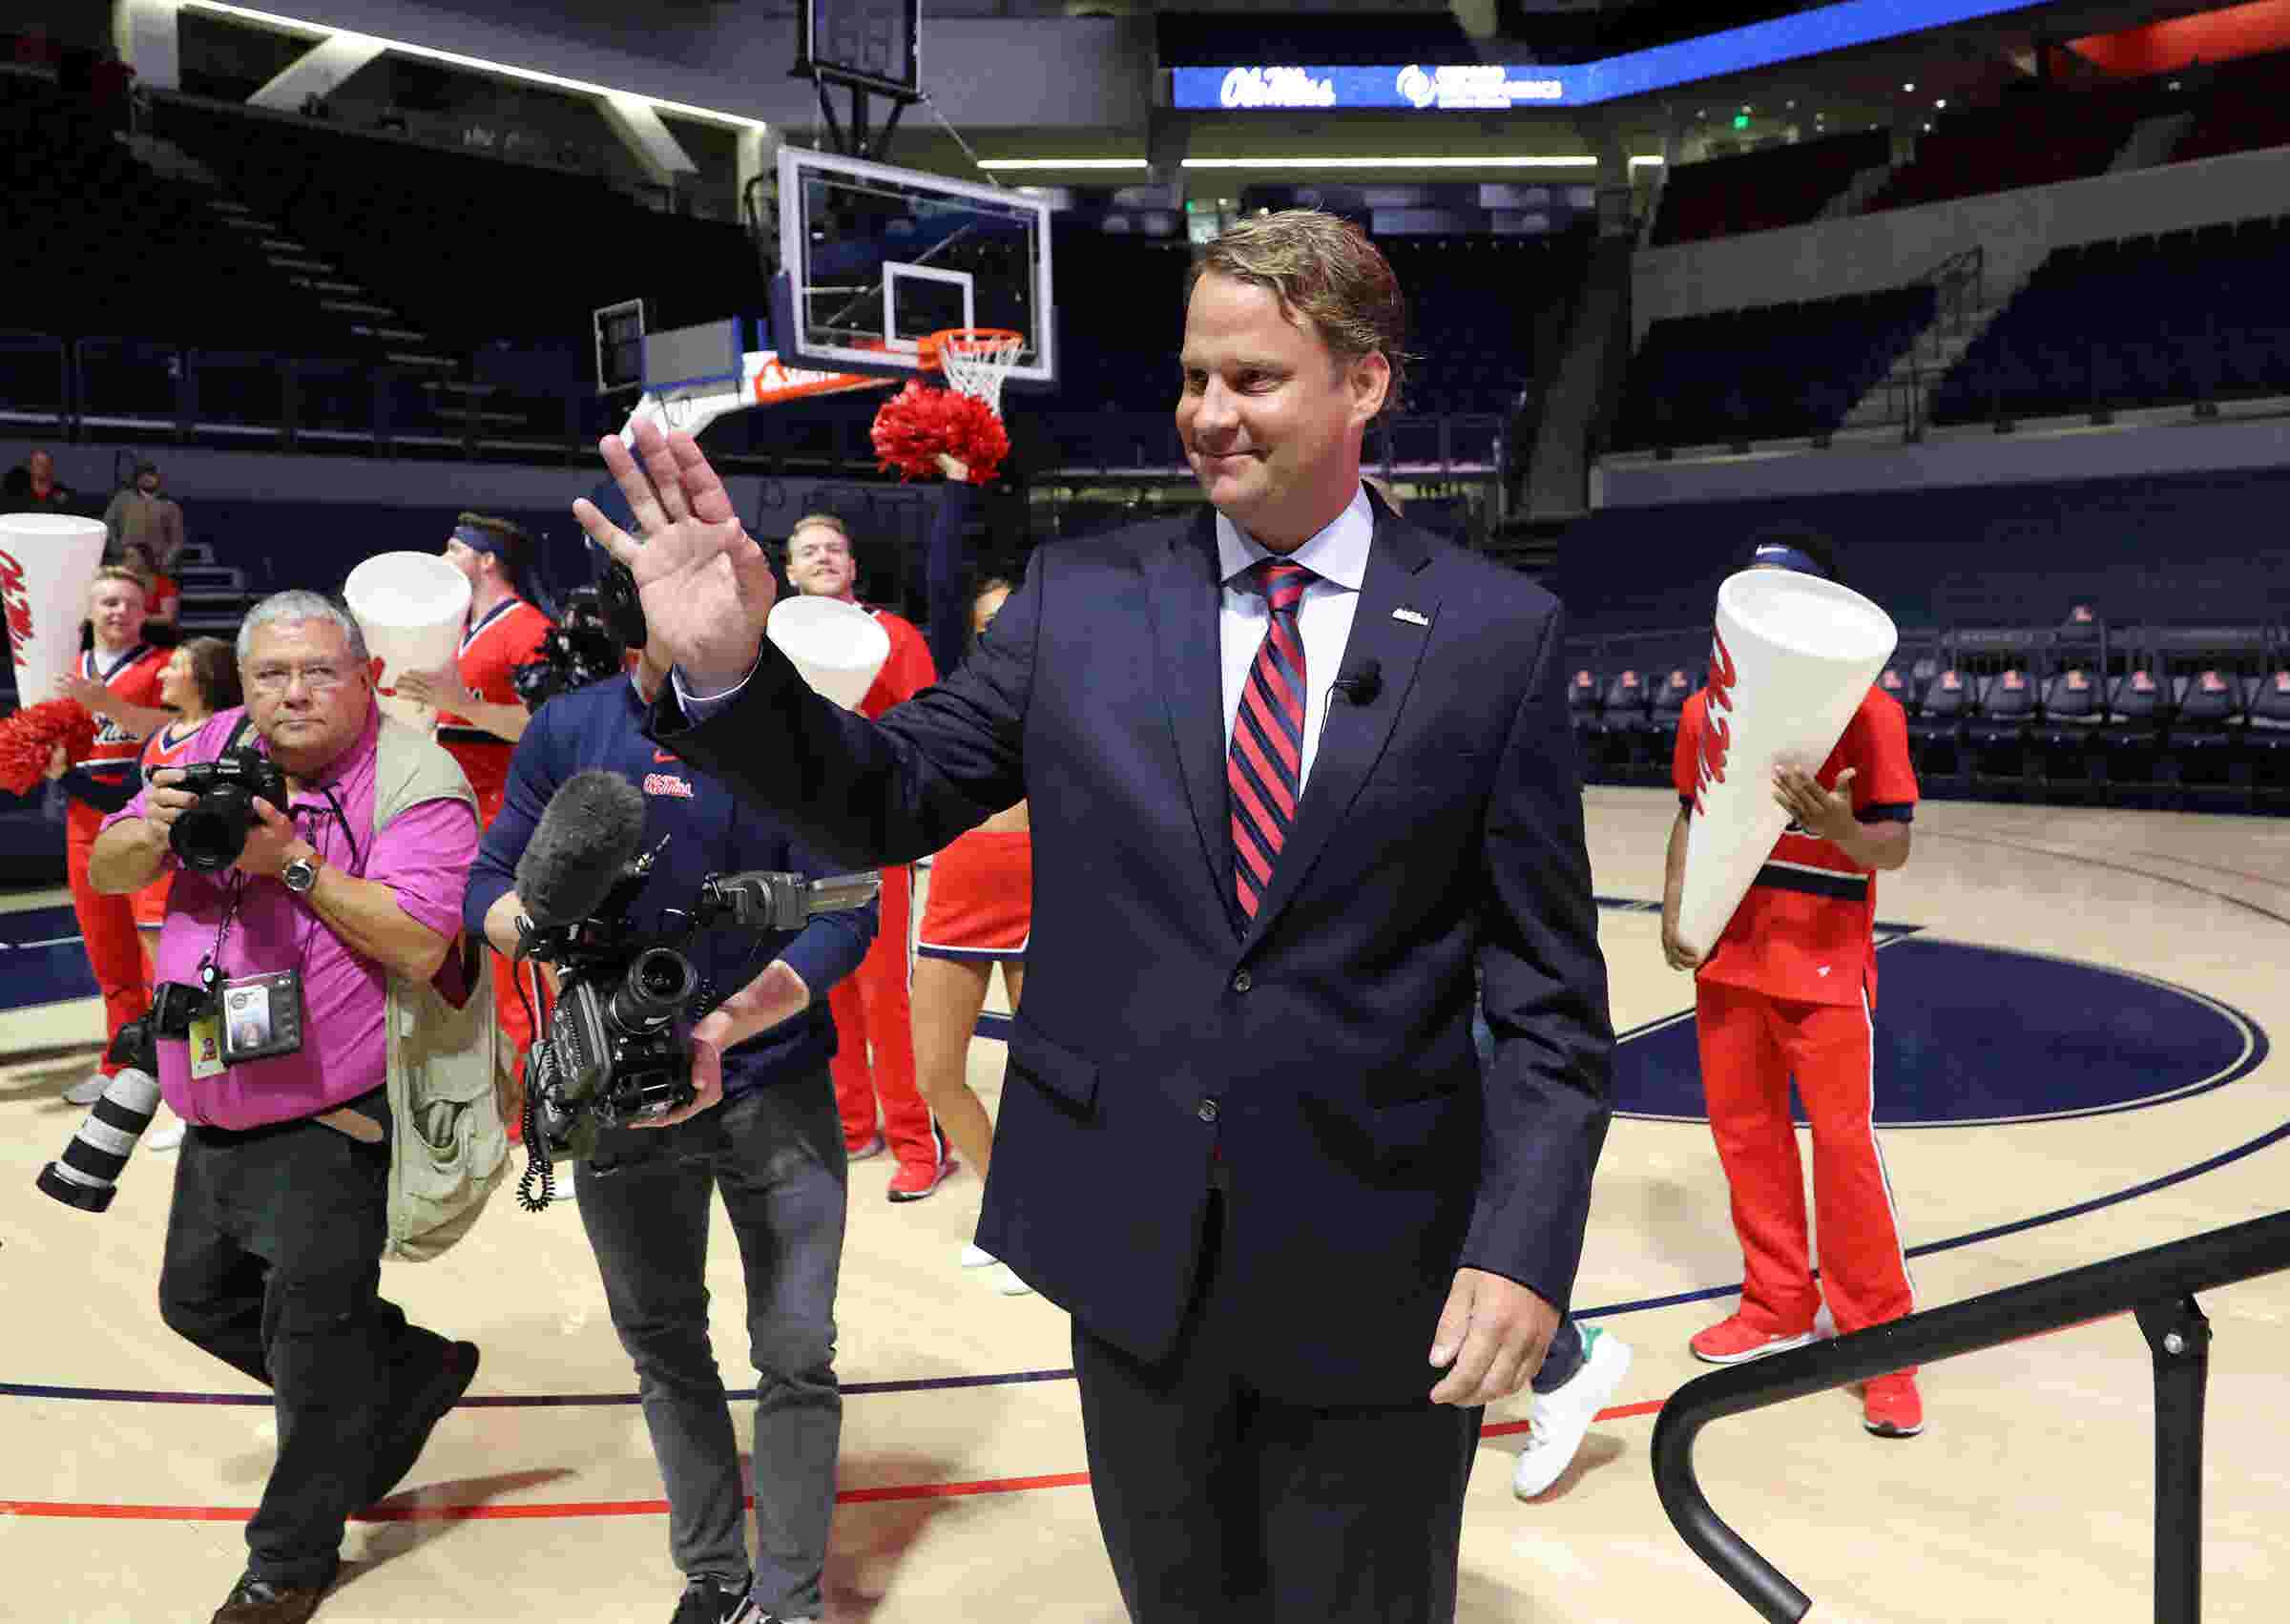 Lane Kiffin and the Ole Miss coaching staff introduced at The Pavilion